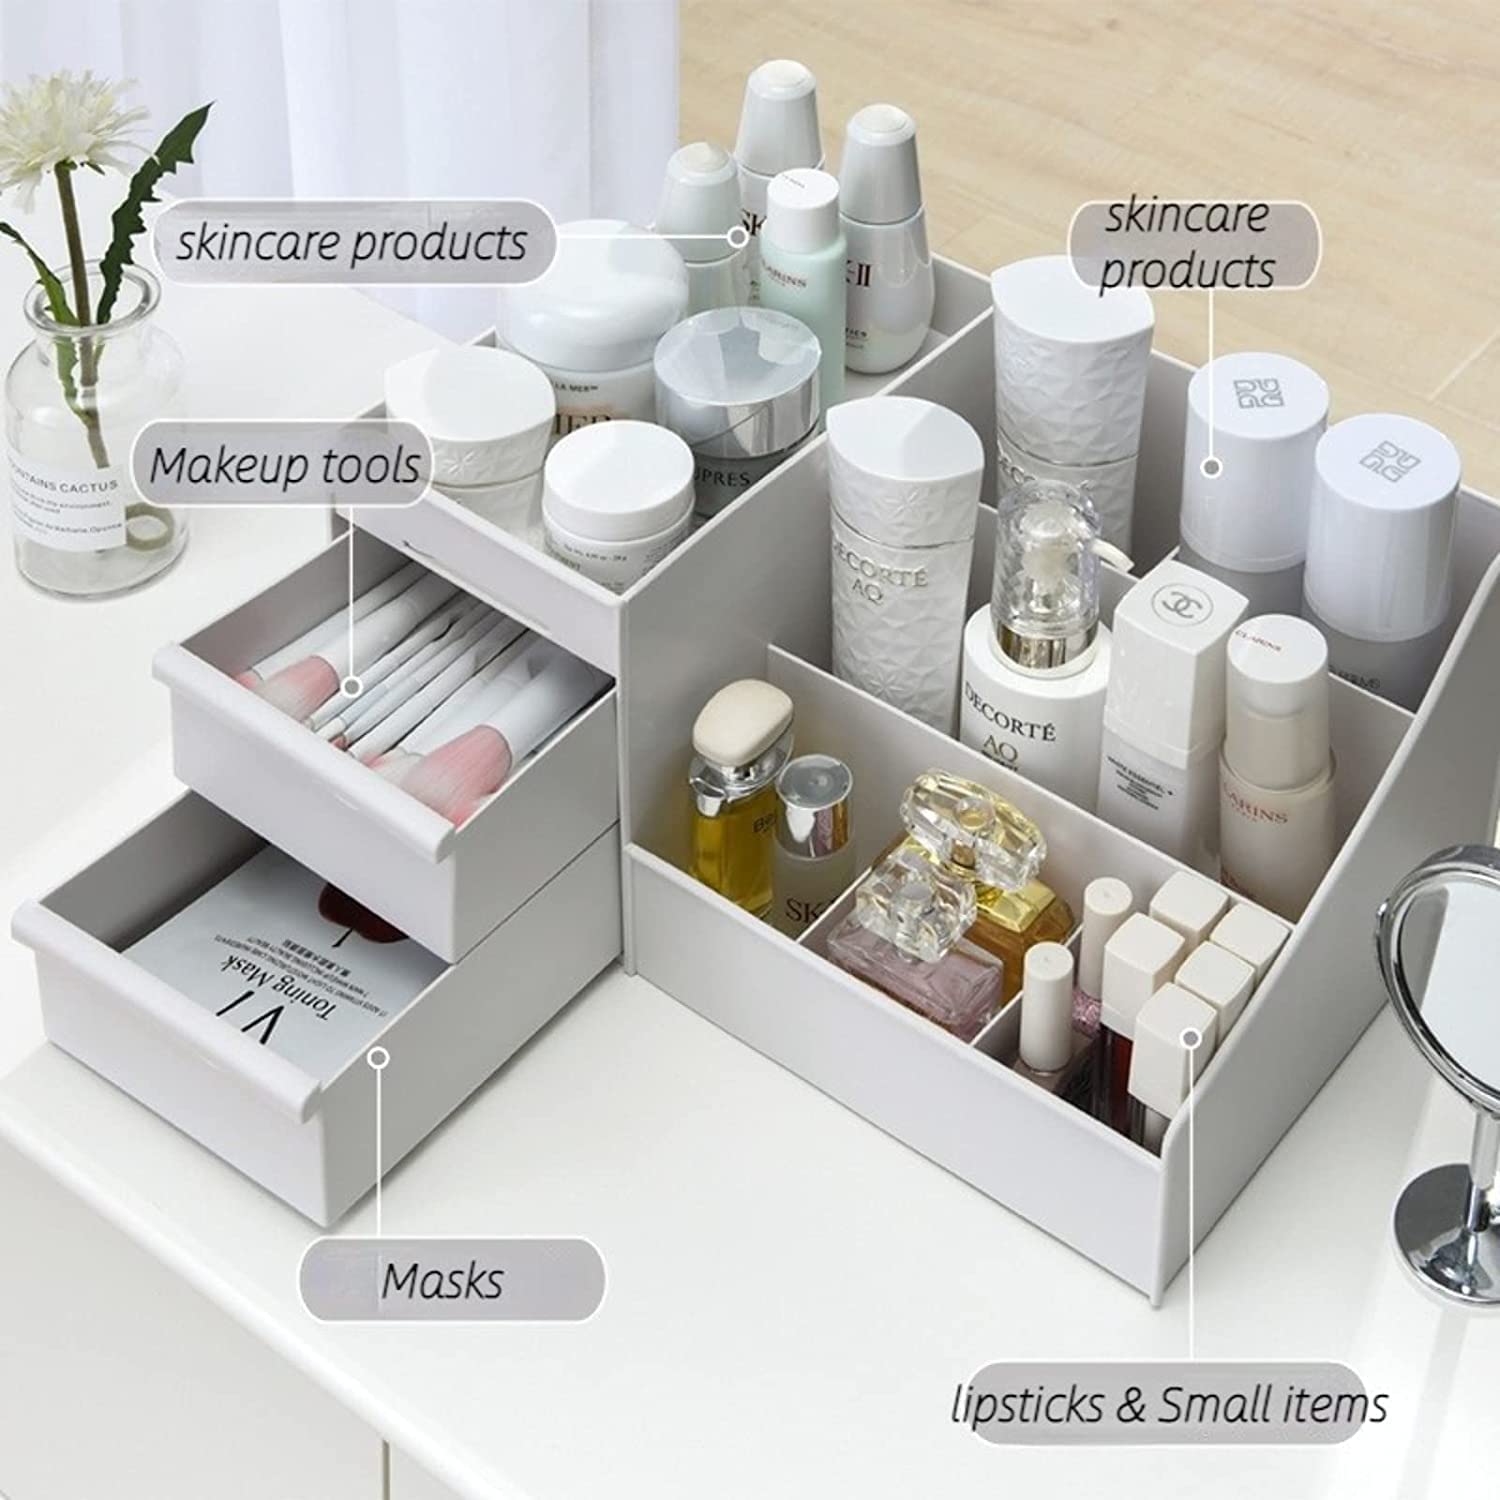 Dressing Table Makeup Box, Desktop Cosmetic Storage Box With Drawer, Makeup Sundries Storage Organizer, Cabinet Sorting Box, Jewelry Nail Polish Makeup Drawer Container, Multifunctional Divisions Desk Organizer, Drawer Head Ornament Sorting Make Up Box